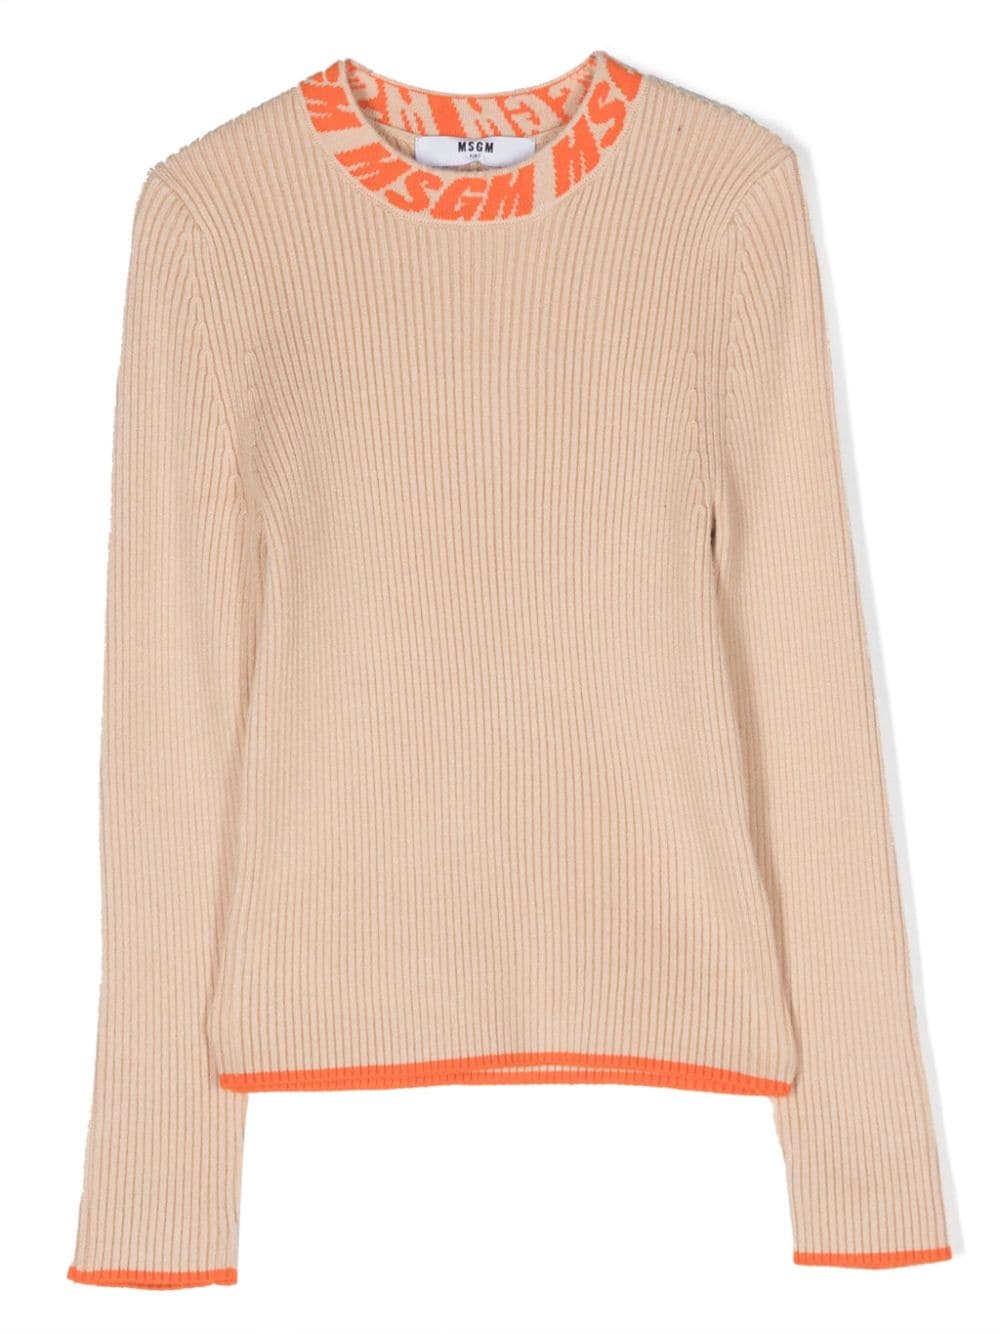 Image 1 of MSGM Kids logo-embroidered knitted jumper